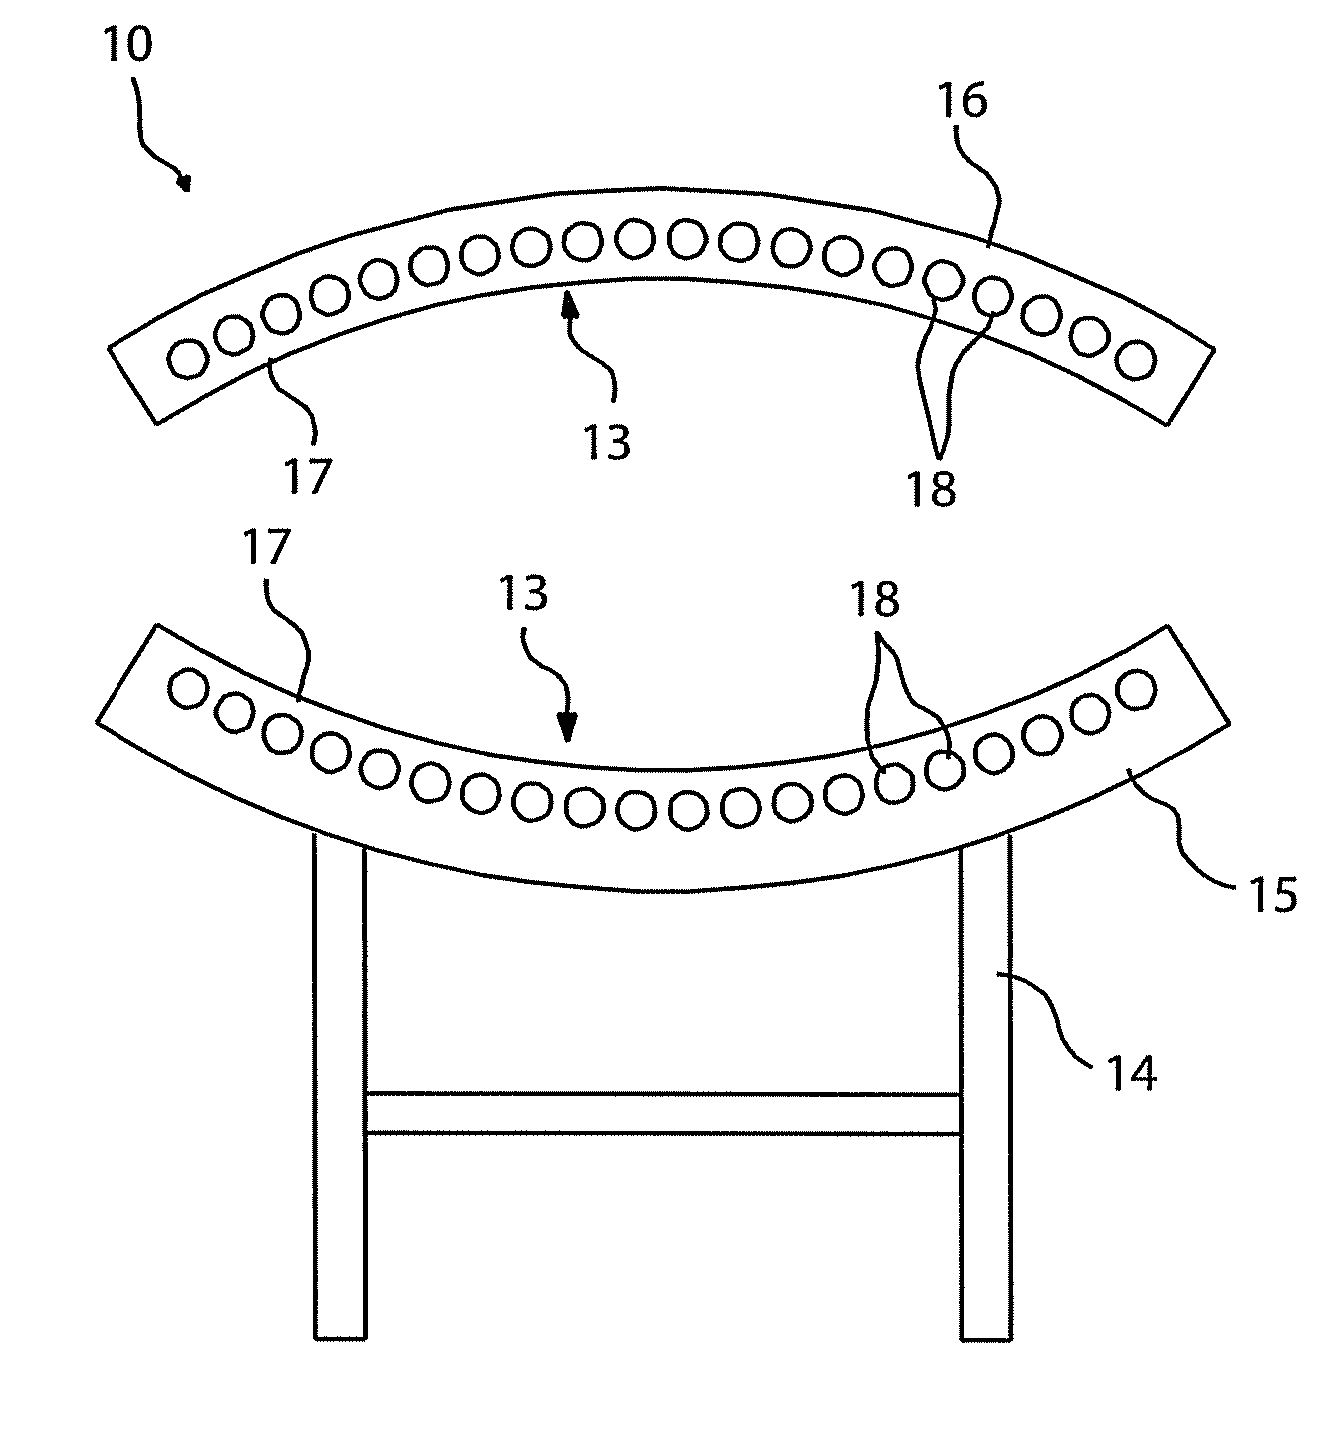 Irradition apparatus for irradiating a human body